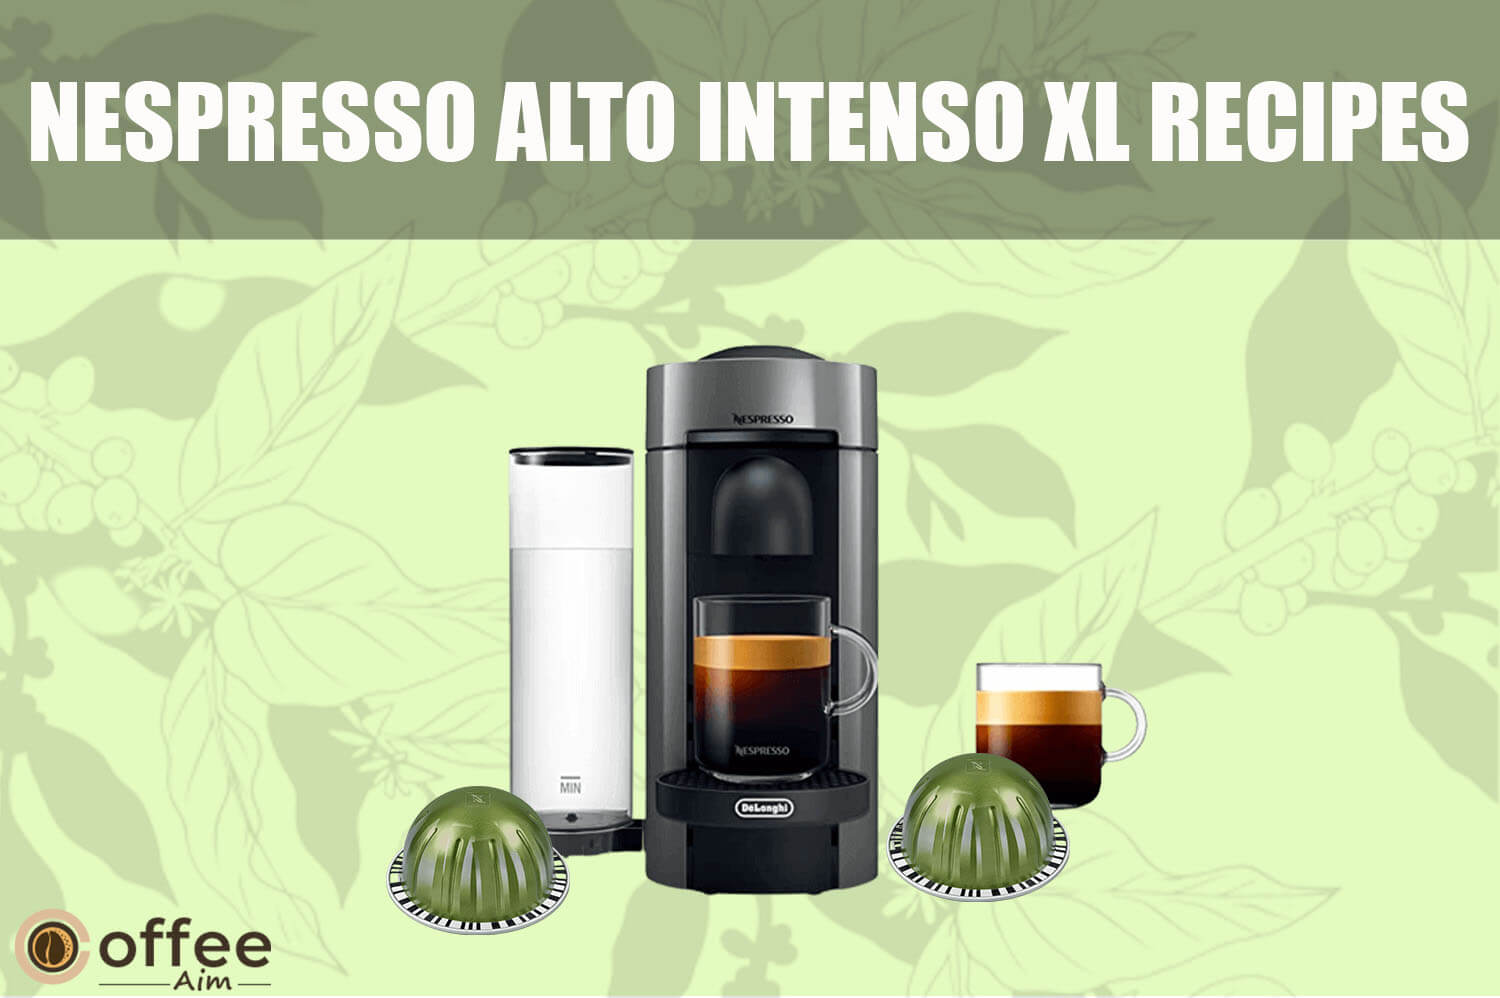 Featured image for the article "Nespresso Alto Intenso XL Recipes"